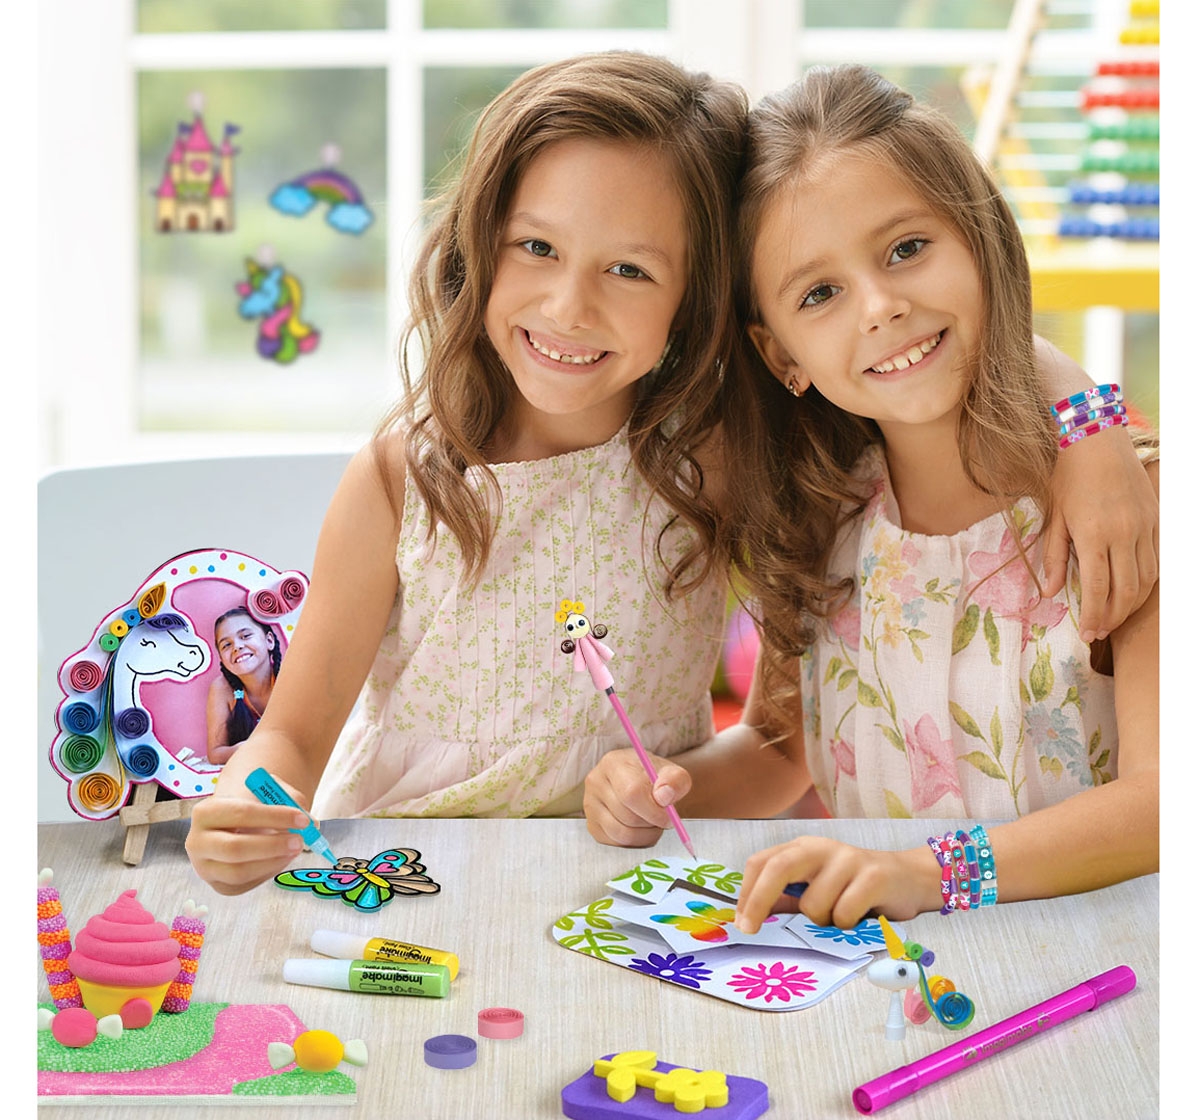 Imagimake | Imagimake Fabulous Craft Quilling Kit Art and Craft set for kids 5Y+, Multicolour 5